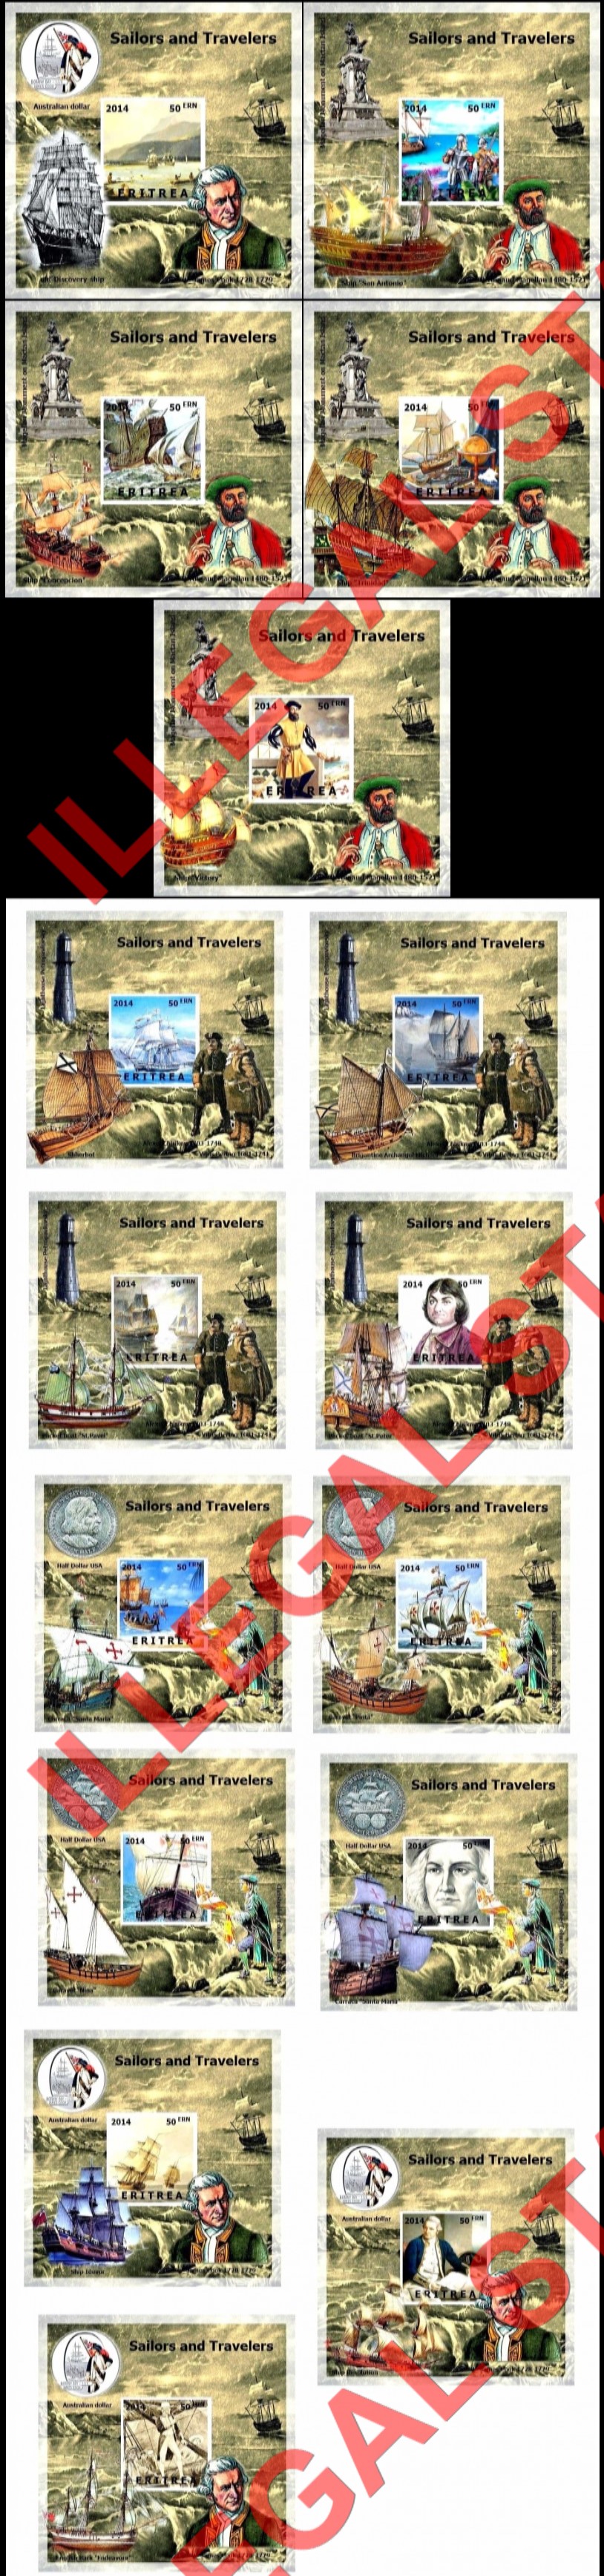 Eritrea 2014 Sailors and Travelers Counterfeit Illegal Stamp Souvenir Sheets of 1